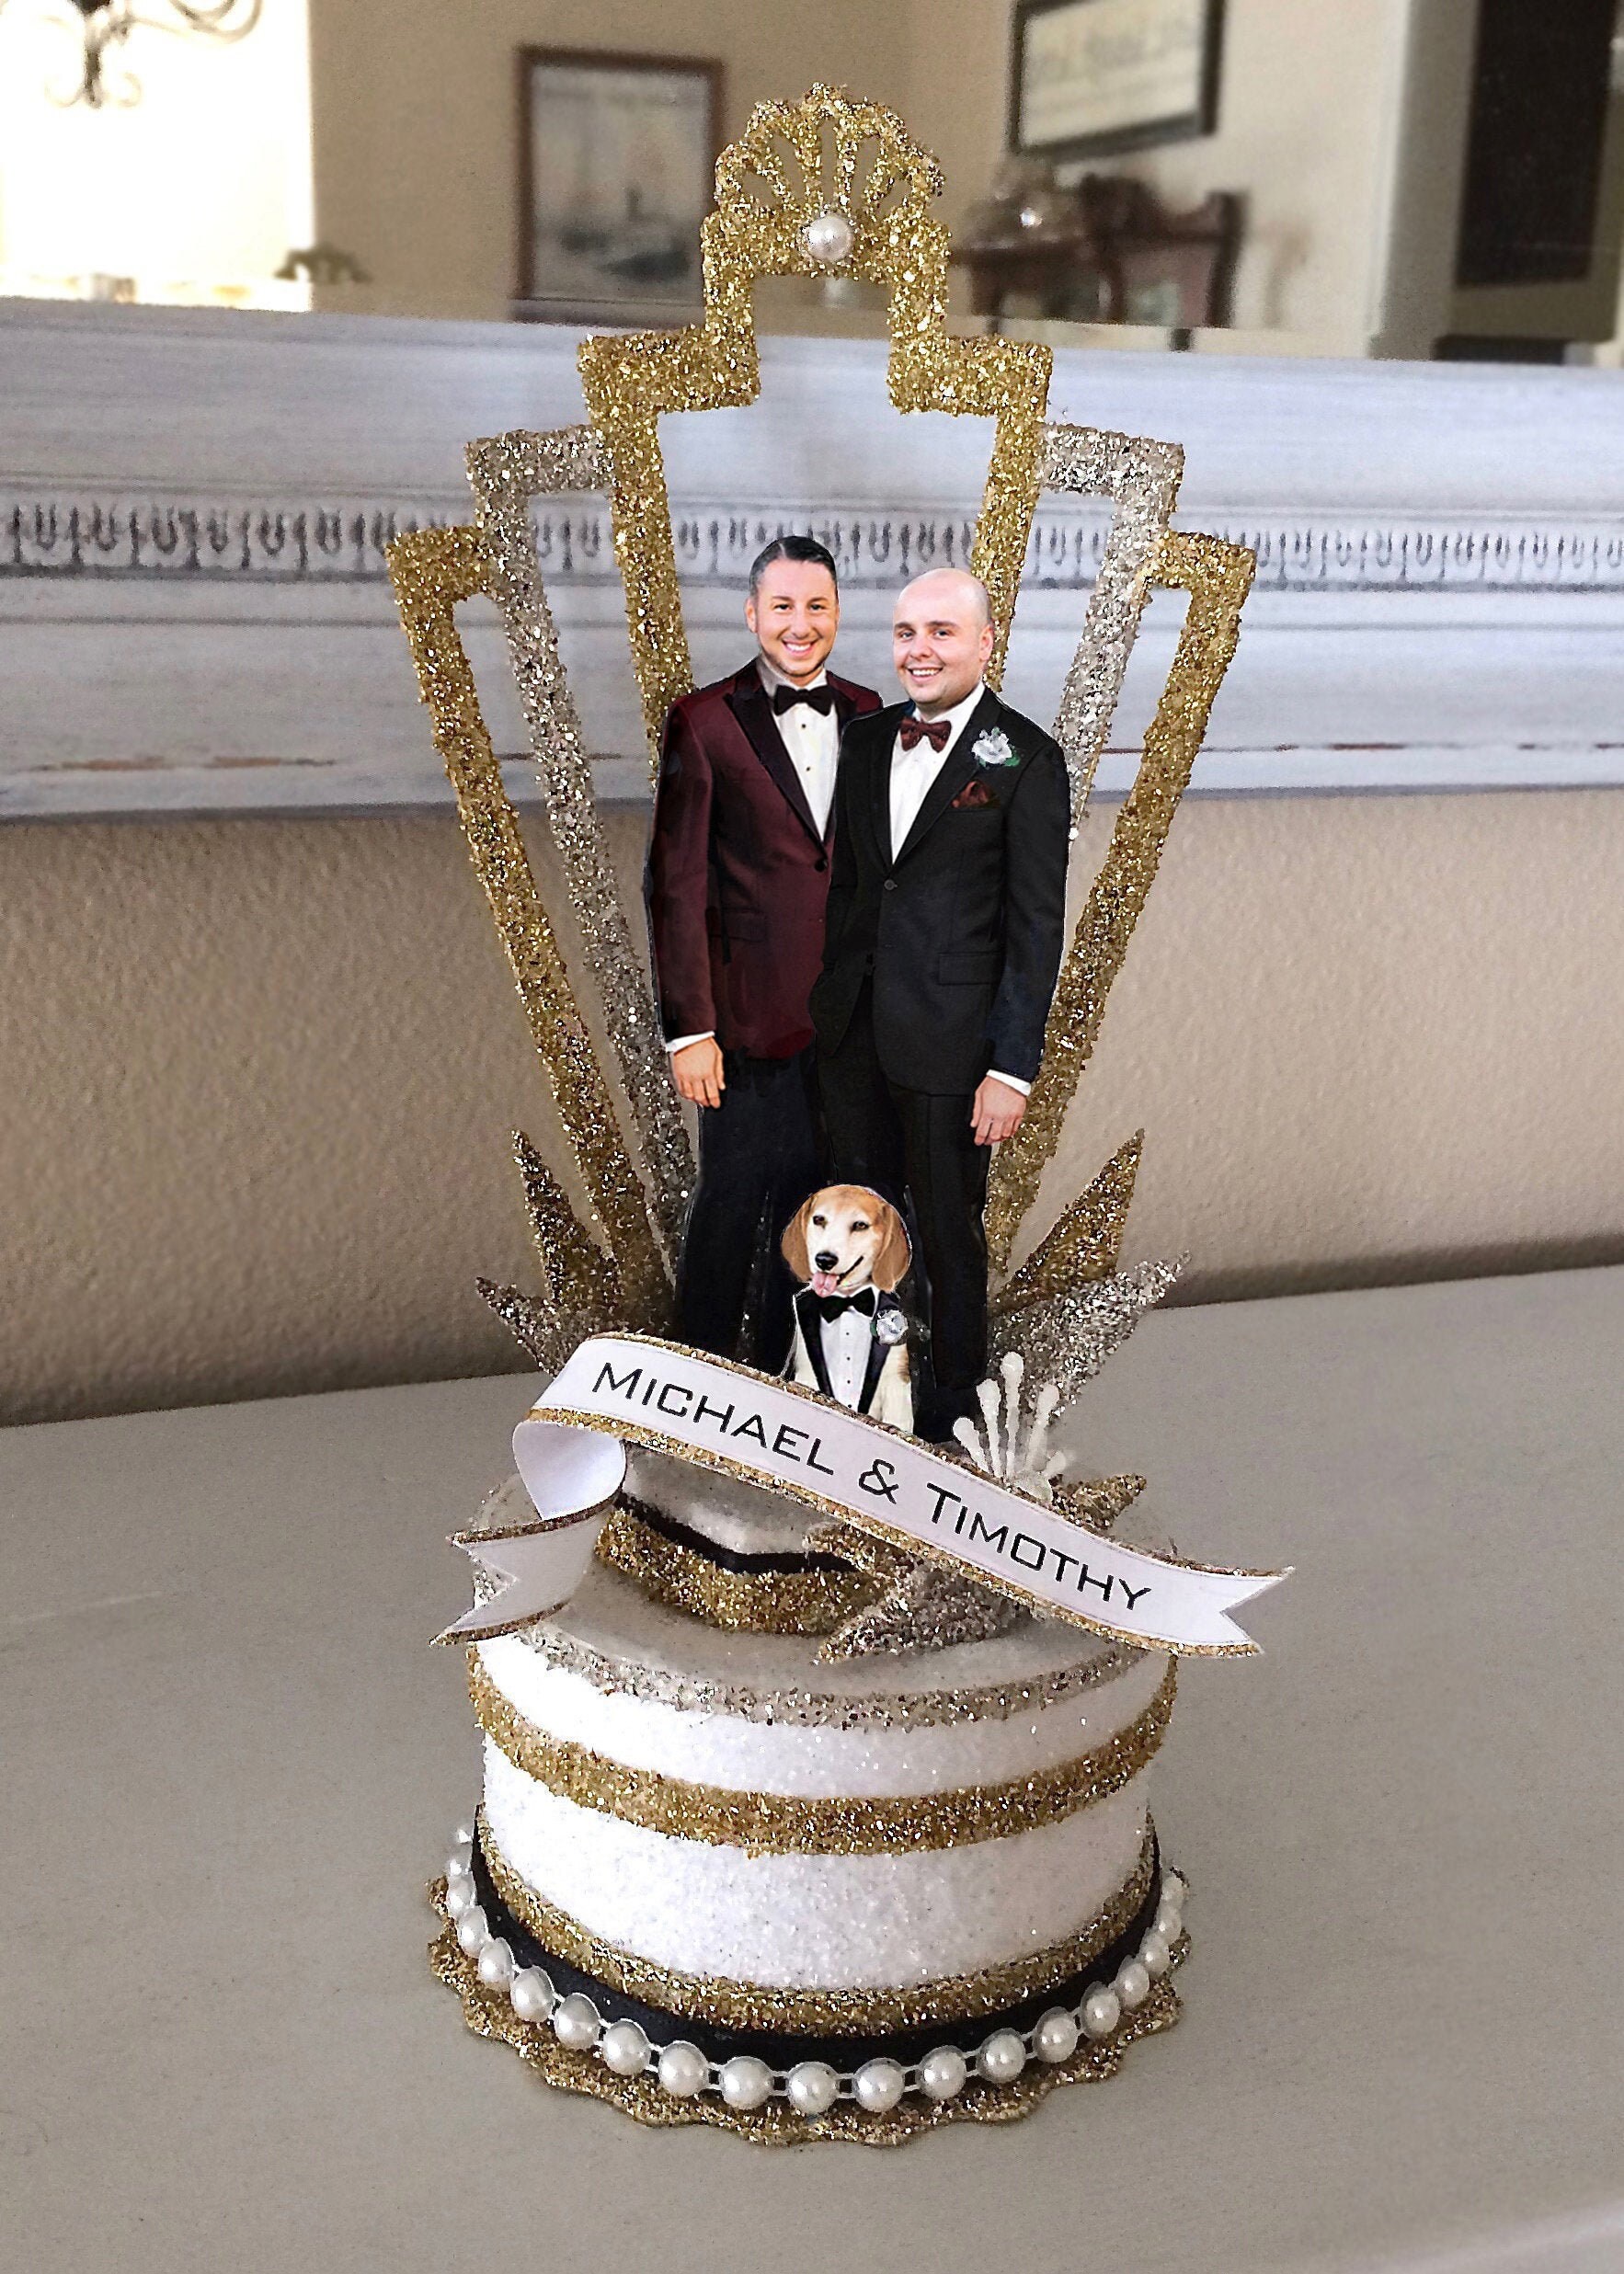 Grow old with me Art Deco cake topper Art Deco wedding cake topper Art Deco wedding decor Vintage wedding cake topper